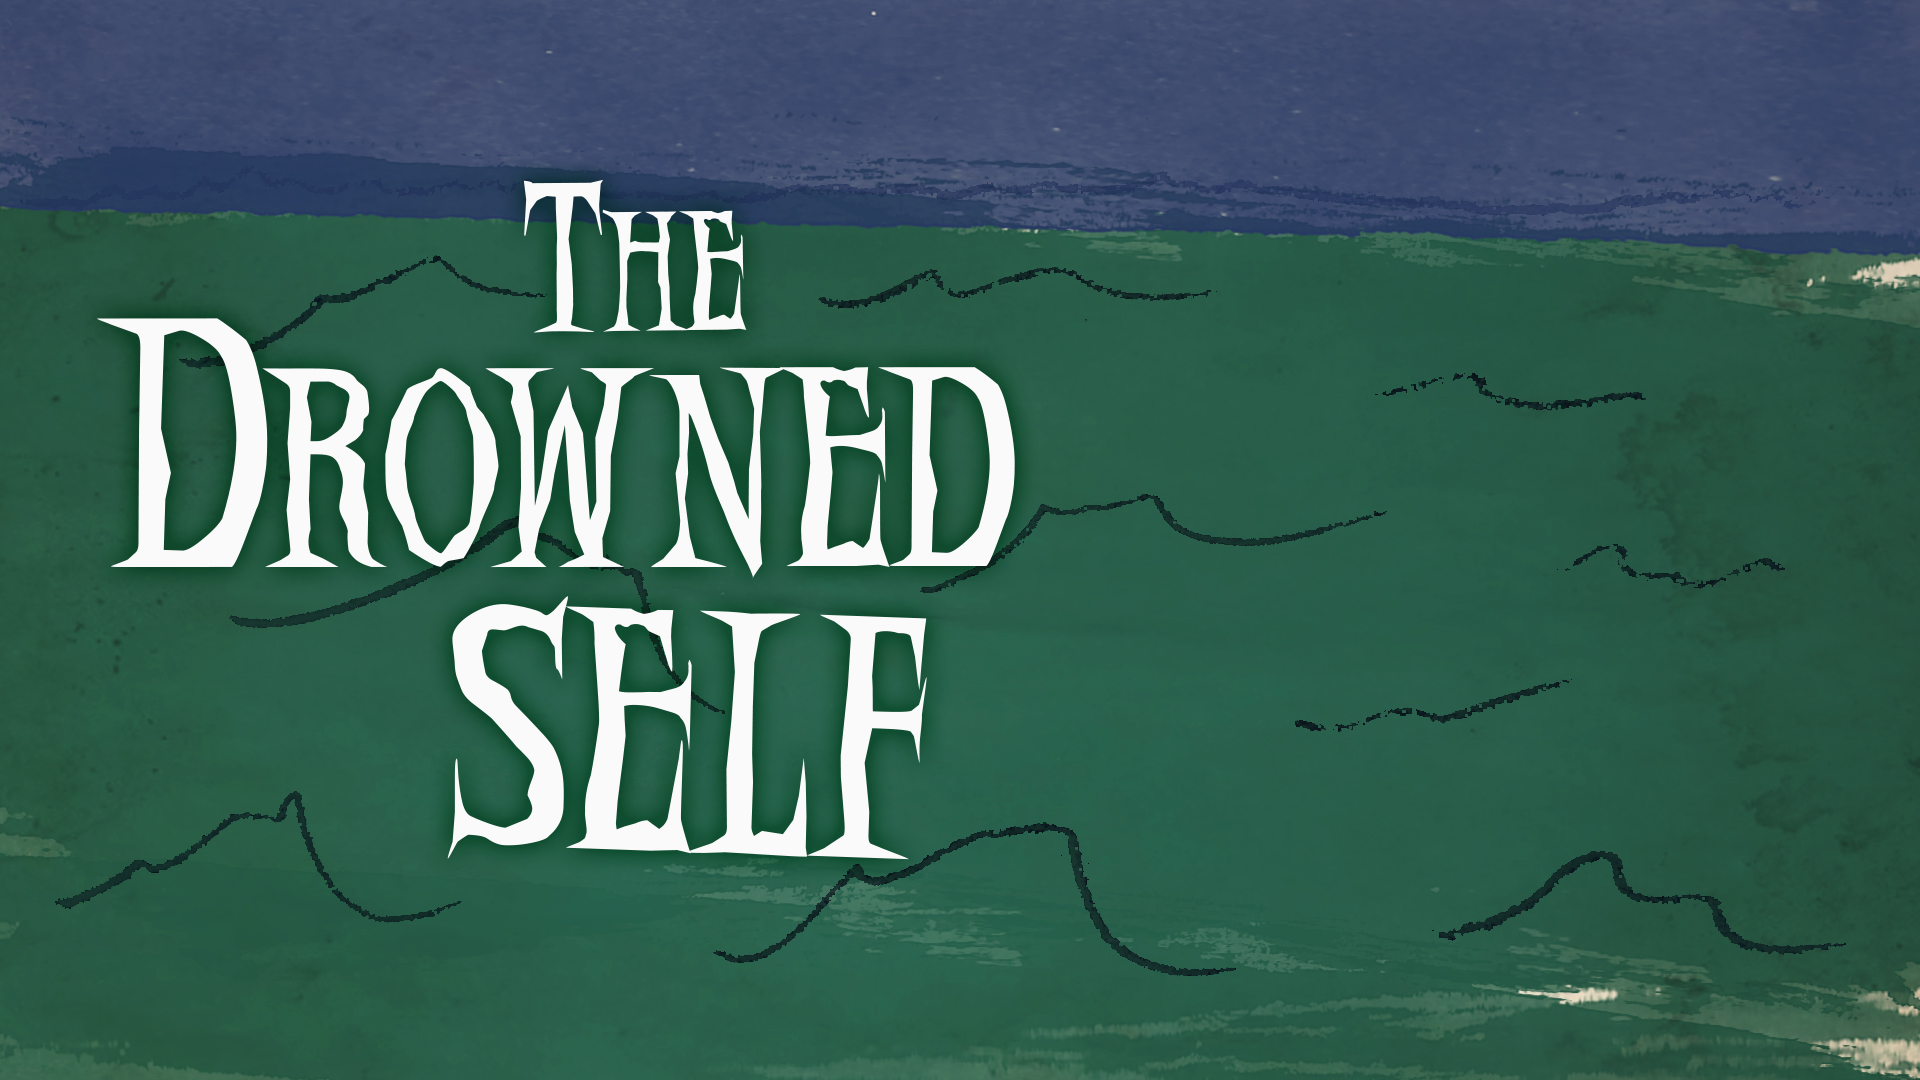 The Drowned Self